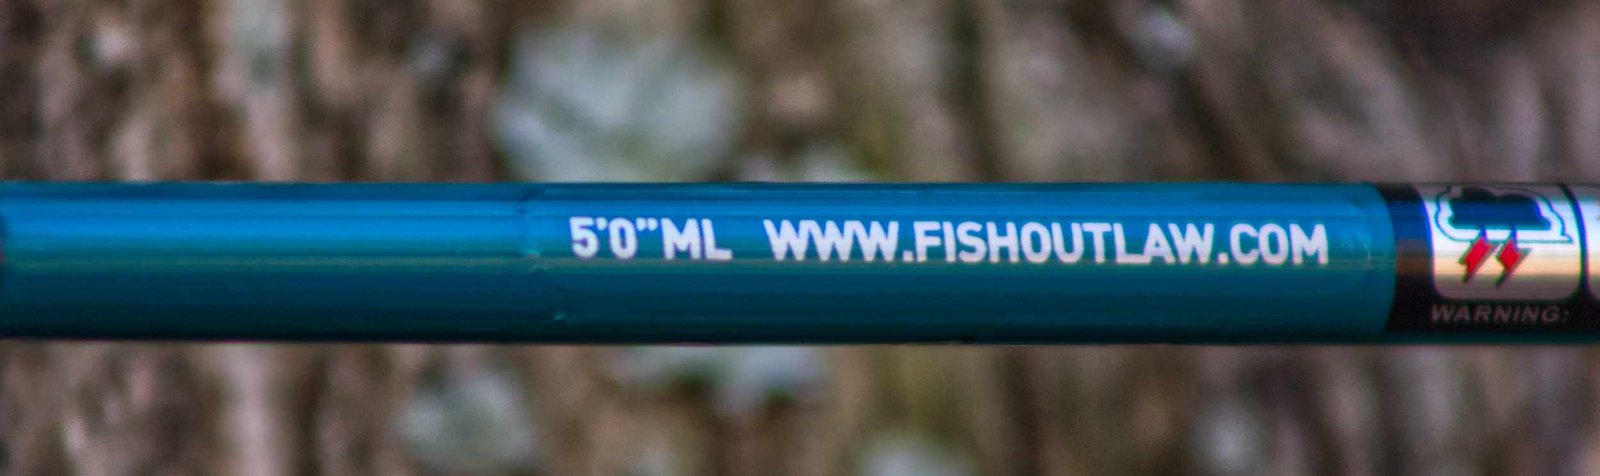 24T Outlaw 5.0 - 1 Piece Spinning Rod